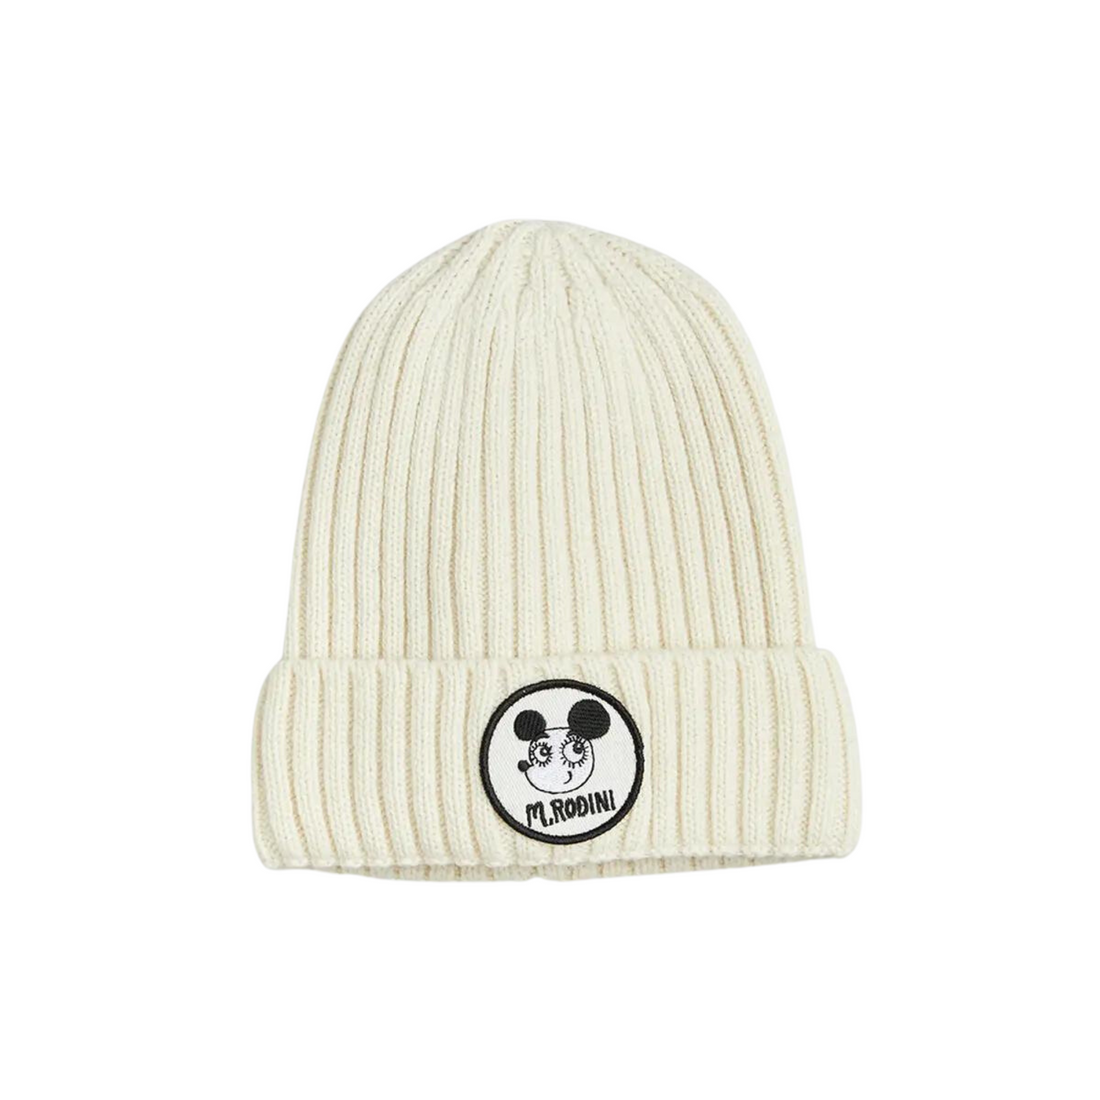 Wool Knitted hat - White